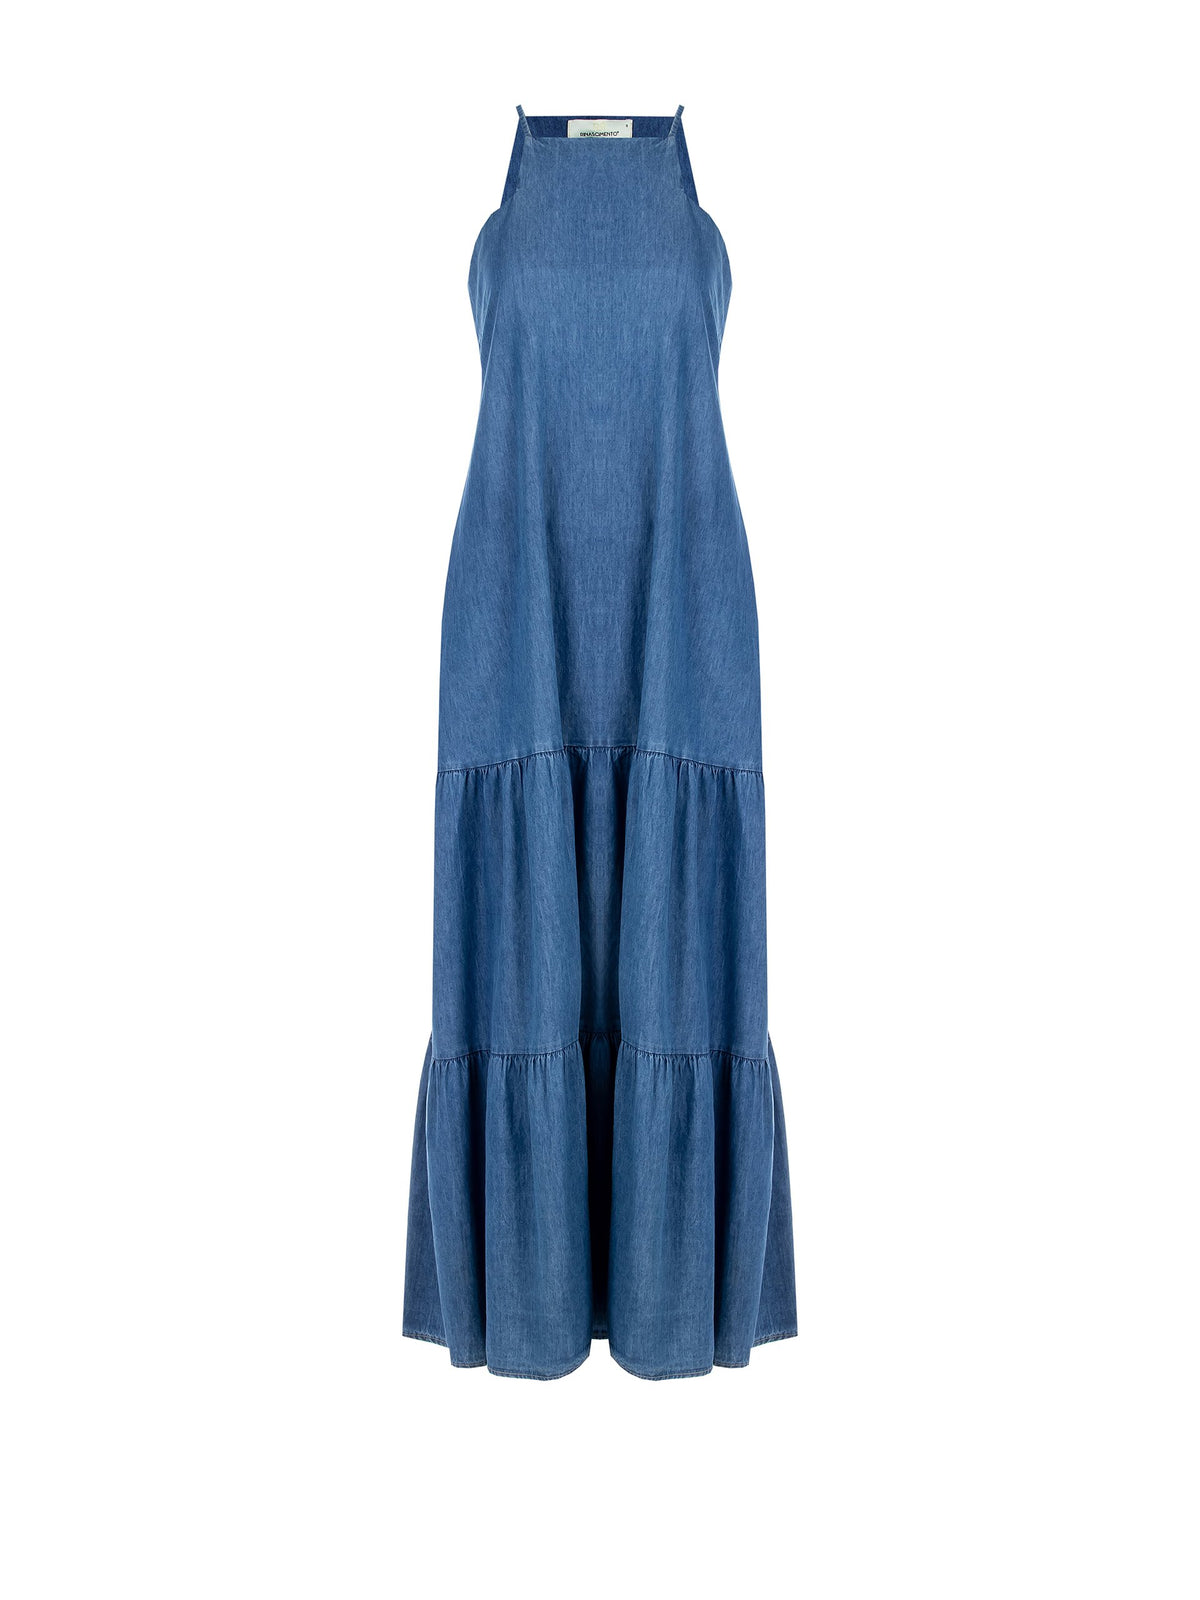 Long A-line Dress in Denim with Square Neckline and Pockets